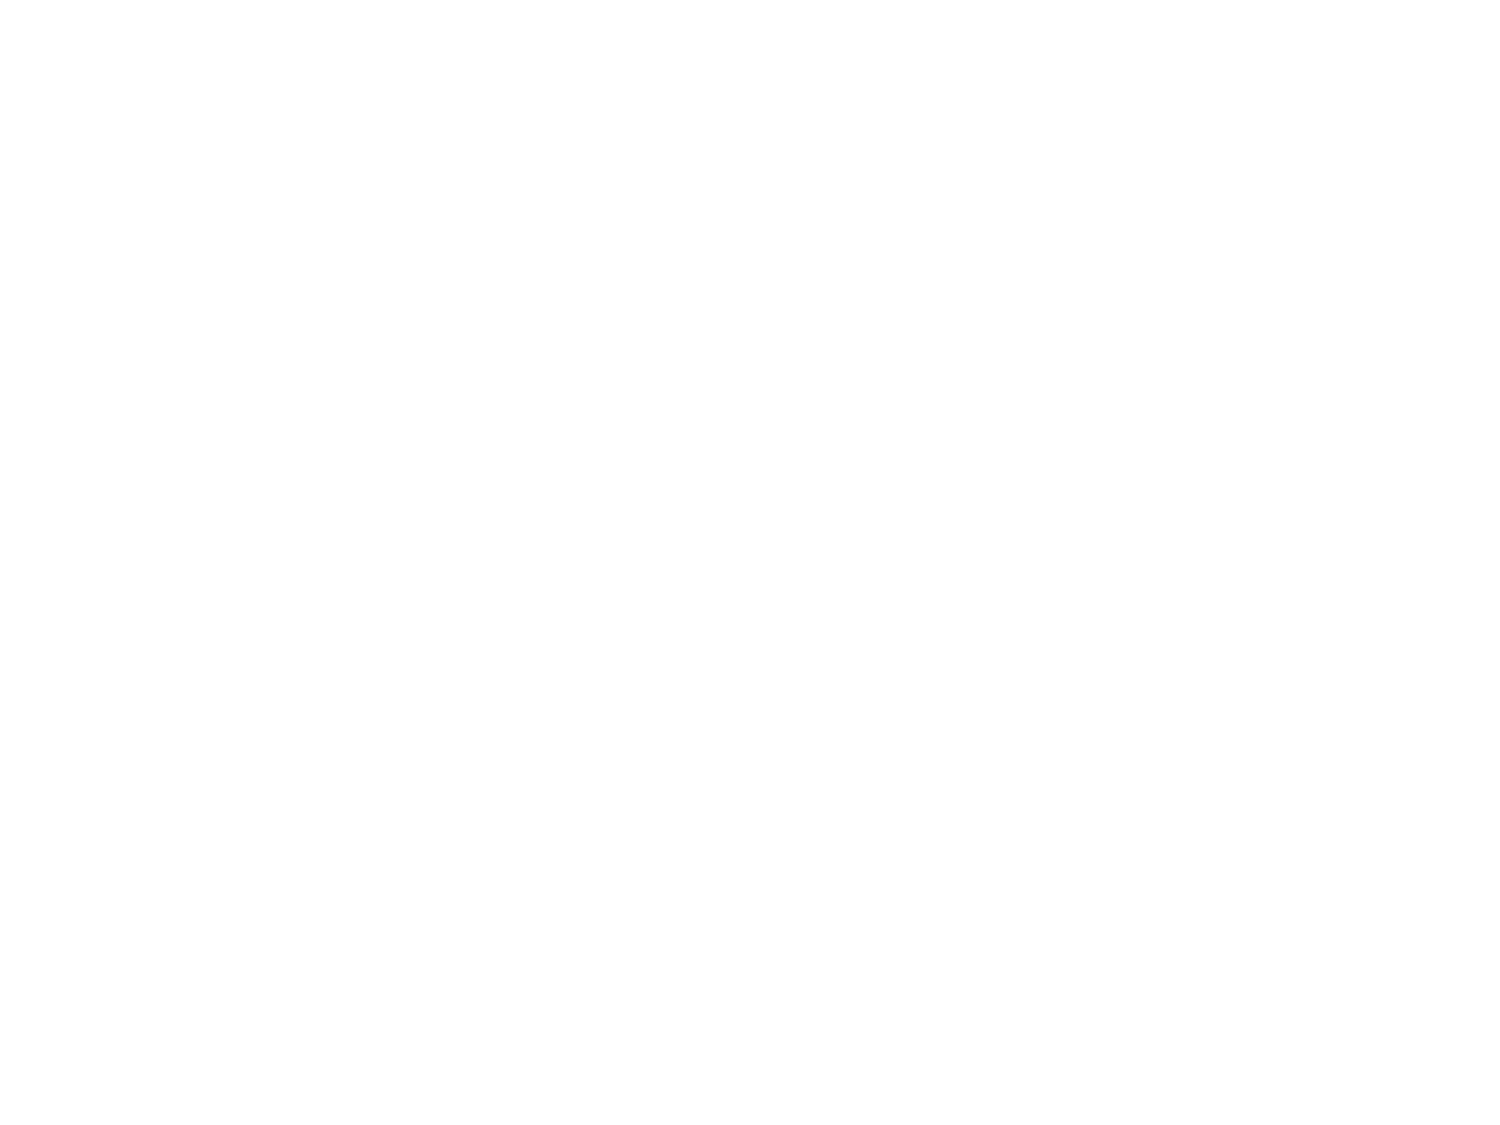 Archers Association of America (AAoA)